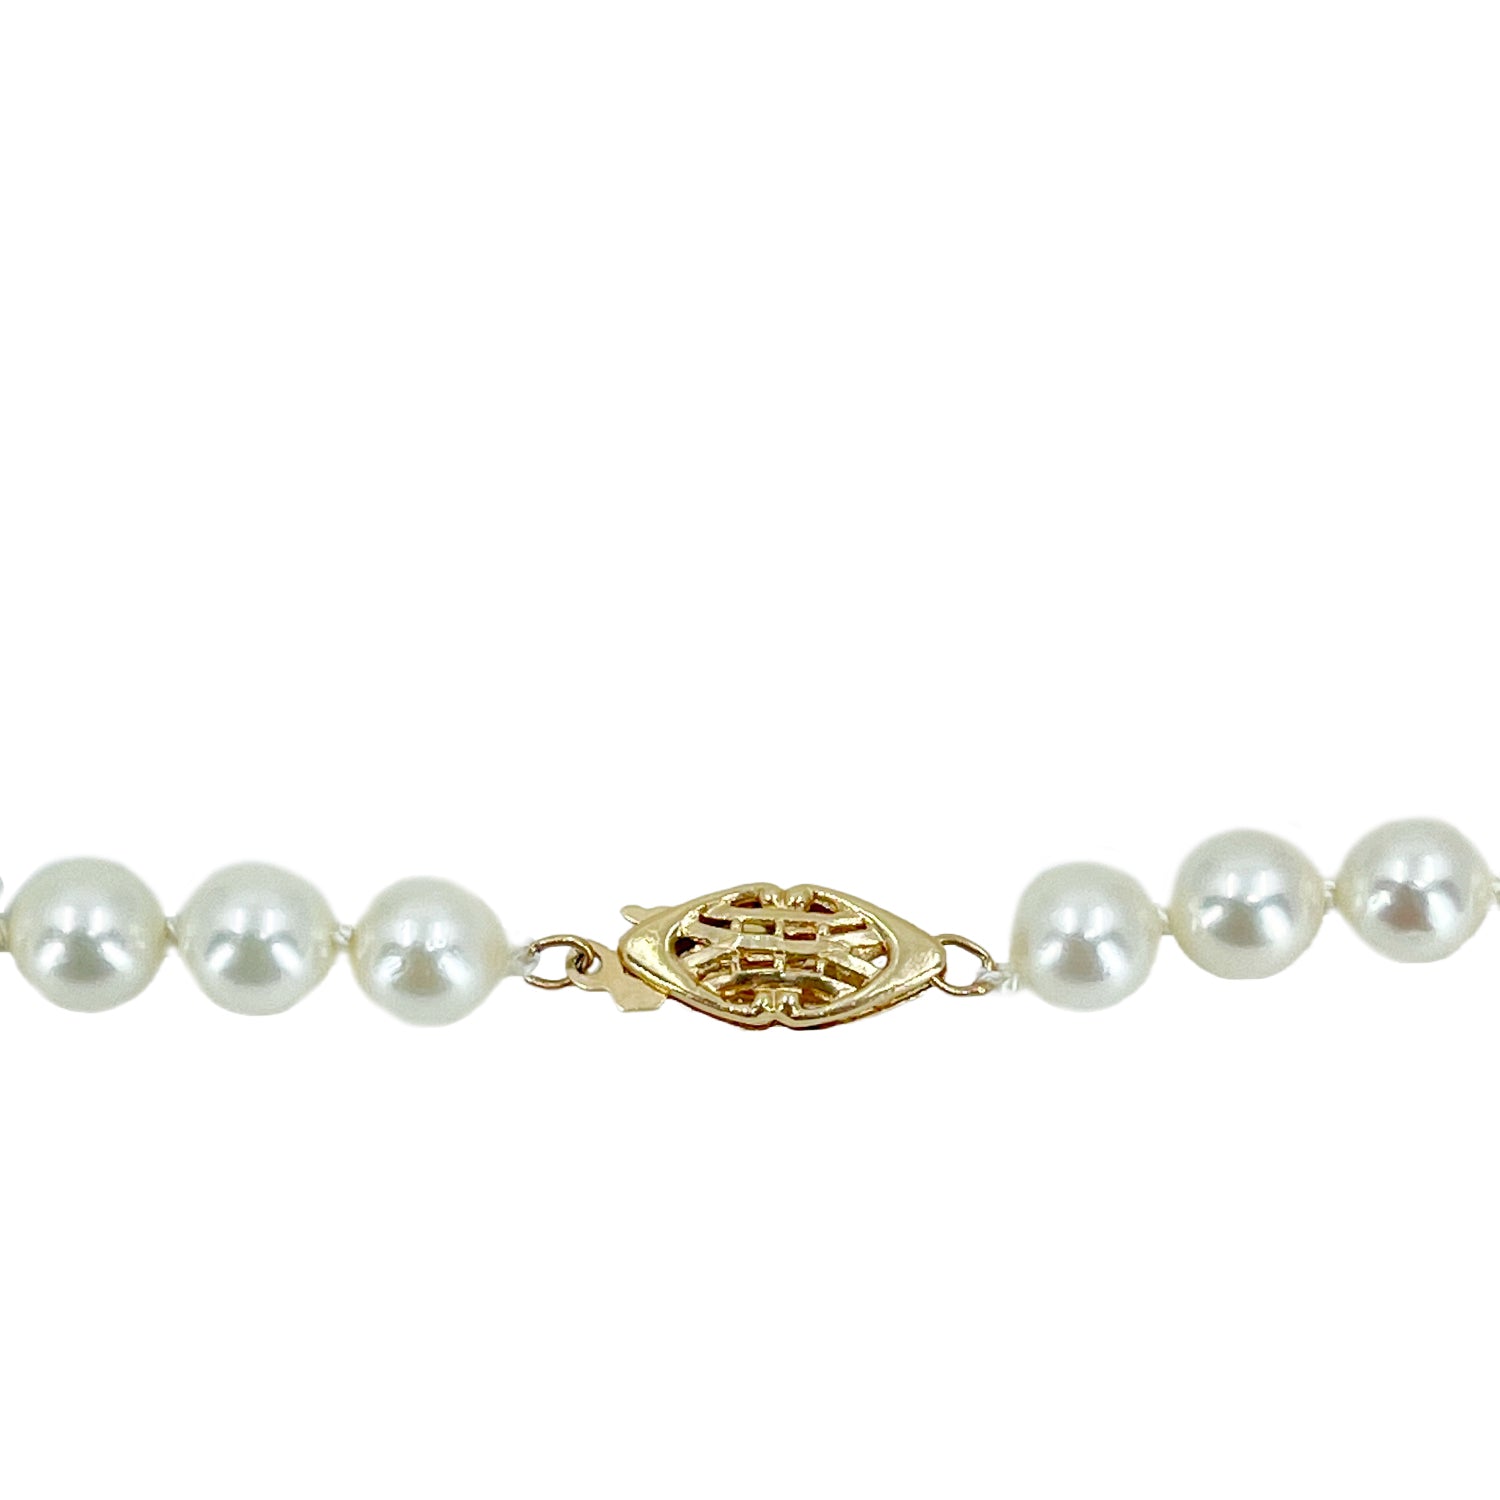 Opera Length Vintage Saltwater Japanese Cultured Akoya Pearl Necklace Strand - 14K White Gold 29.50 Inch